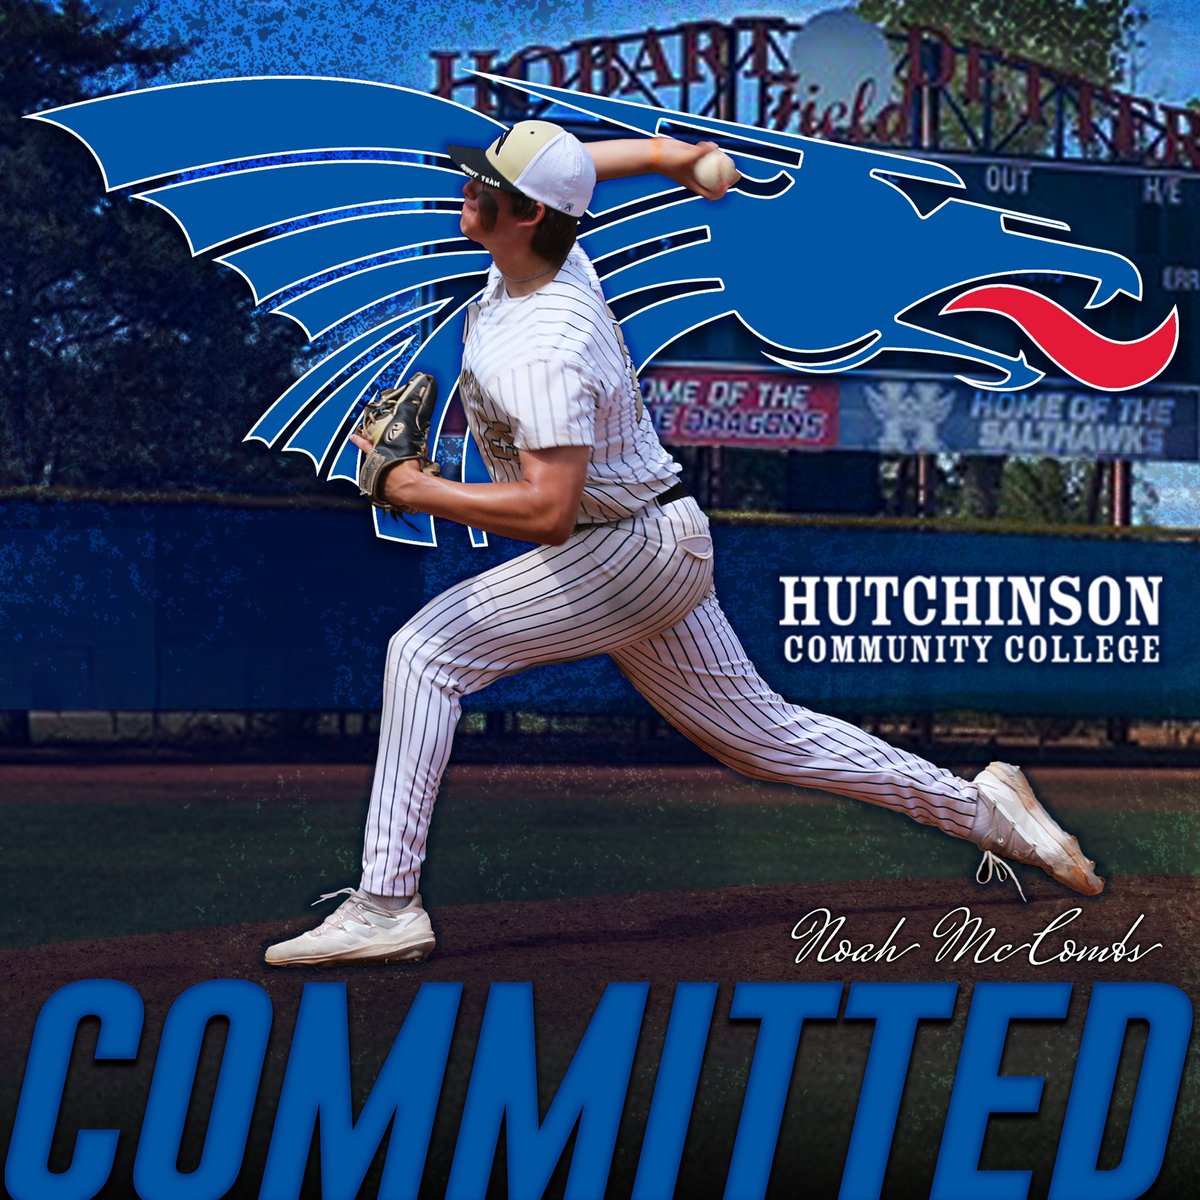 I'm beyond excited to announce l'Il be furthering my academic and athletic career at Hutchinson Community College! #breathefire 🔵🔴🐉